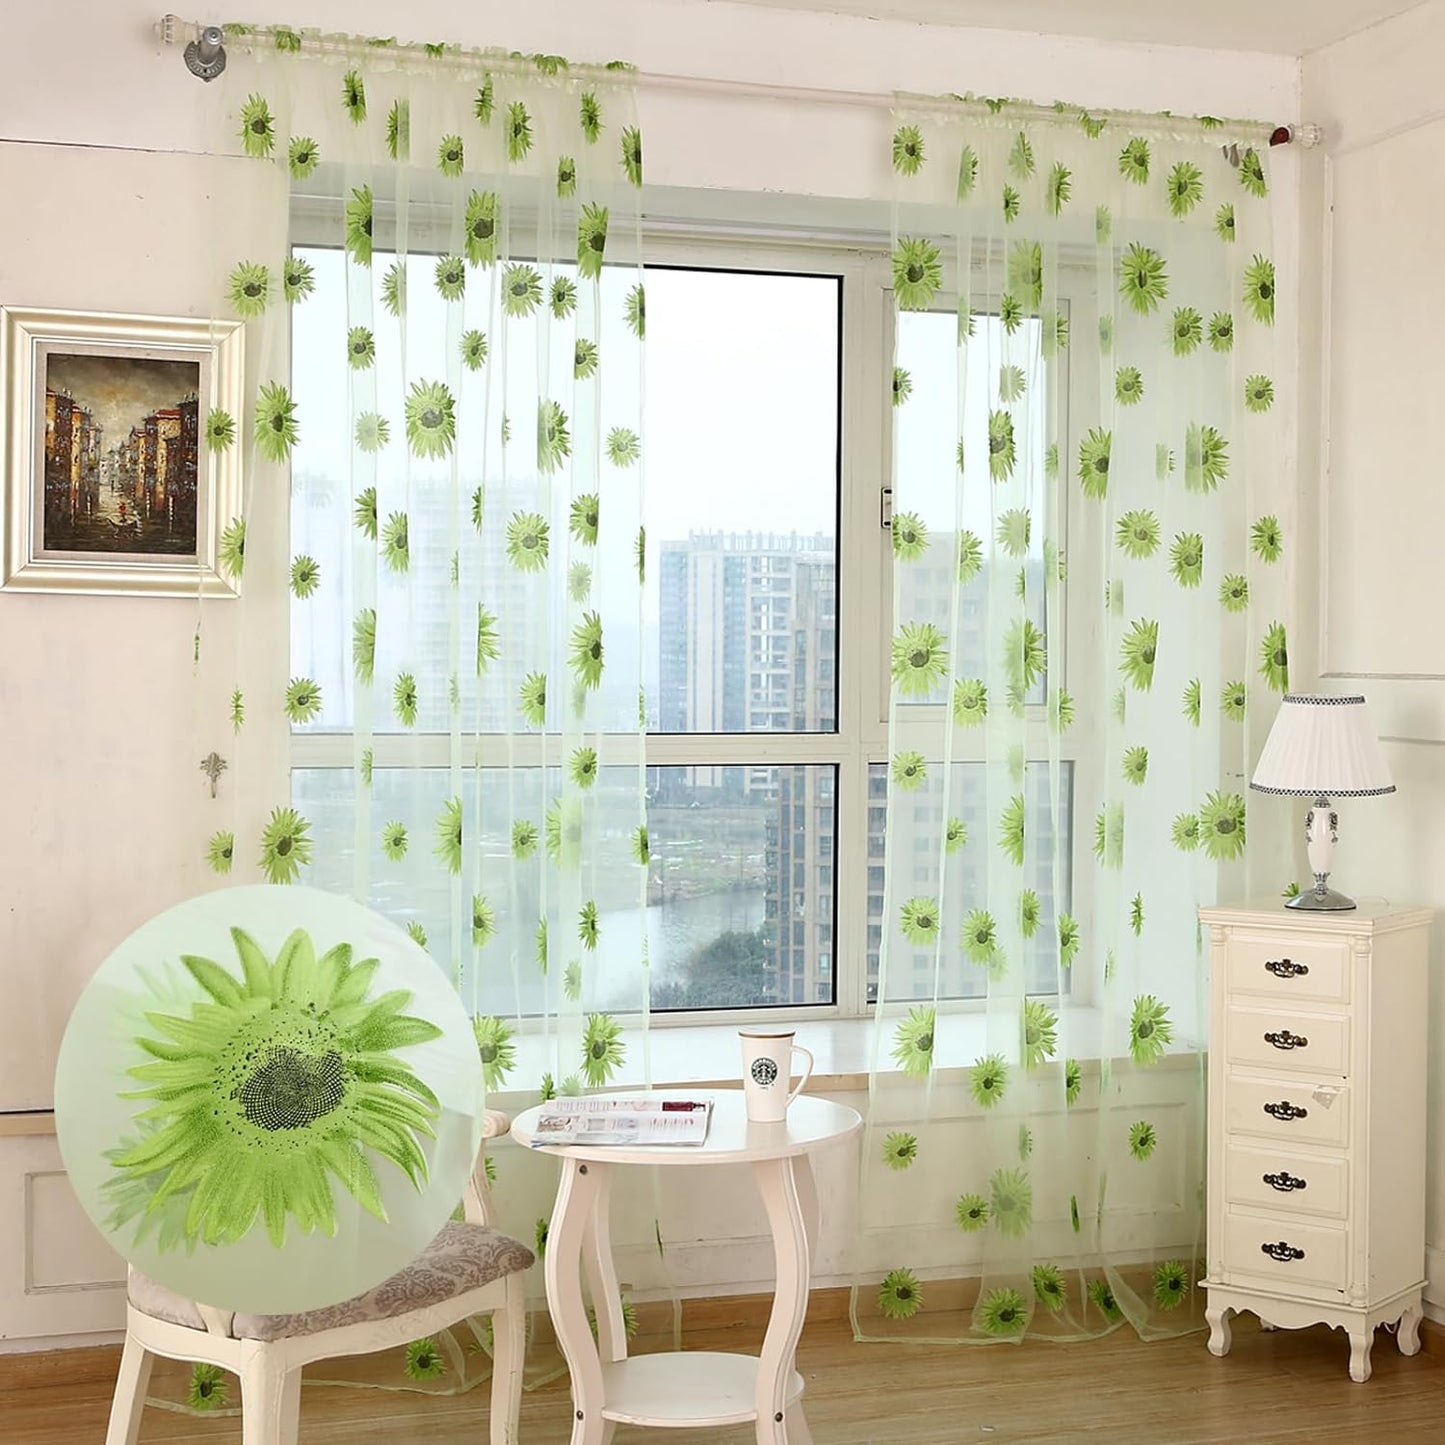 Ufurty Rely2016 Sunflower Window Curtain, 2PCS Sun Flower Floral Voile Sheer Curtain Panels Tulle Room Salix Leaf Sheer Gauze Curtain for Living Room, Bedroom, Balcony - Rod Pocket Top (100 X 200)  Rely2016 Green Flower 100*200Cm 